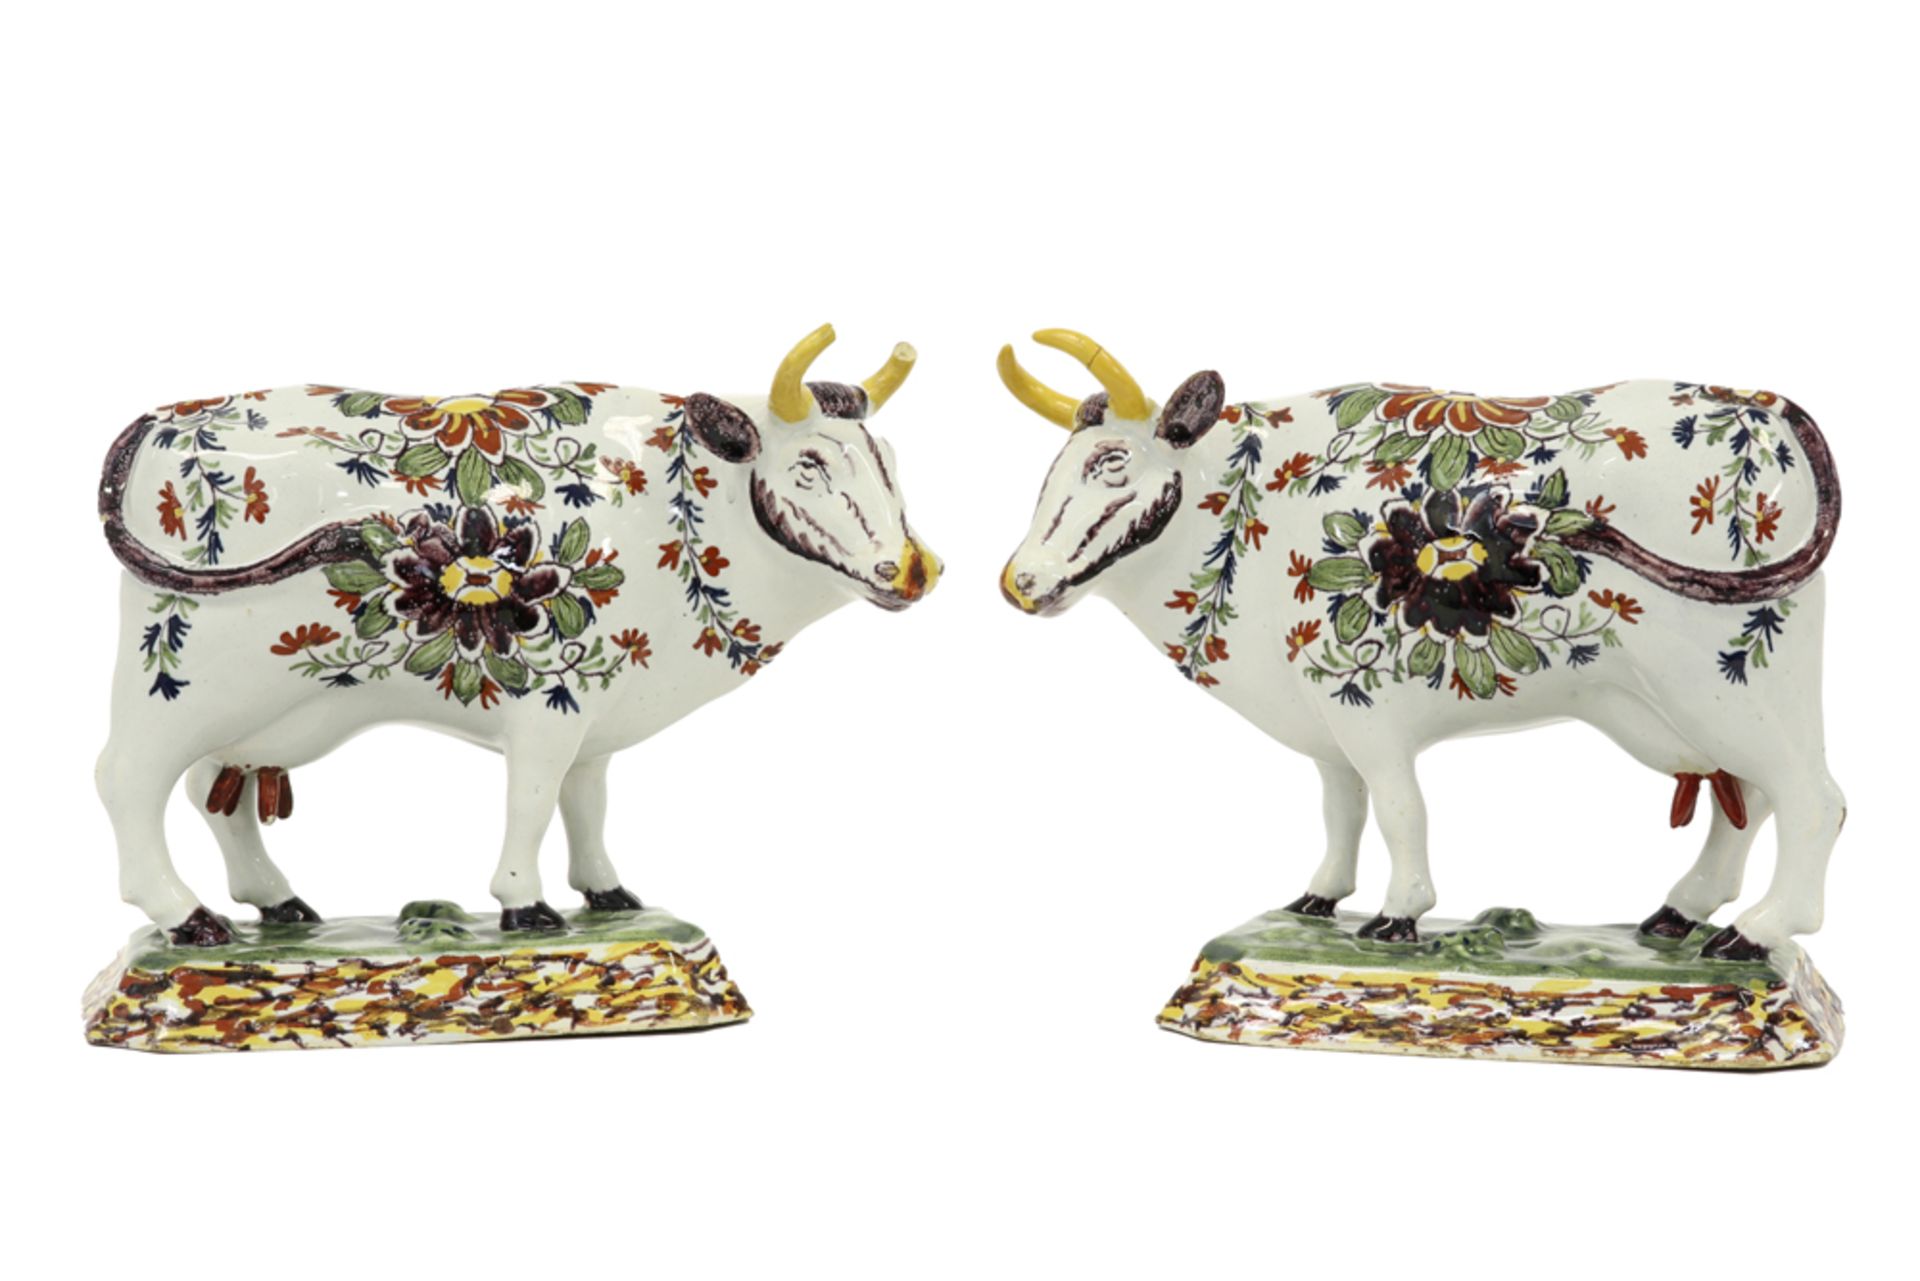 pair of 18th Cent. Delft polychrome ceramic "Cows" marked "De Lampetkan" || Paar achttiende